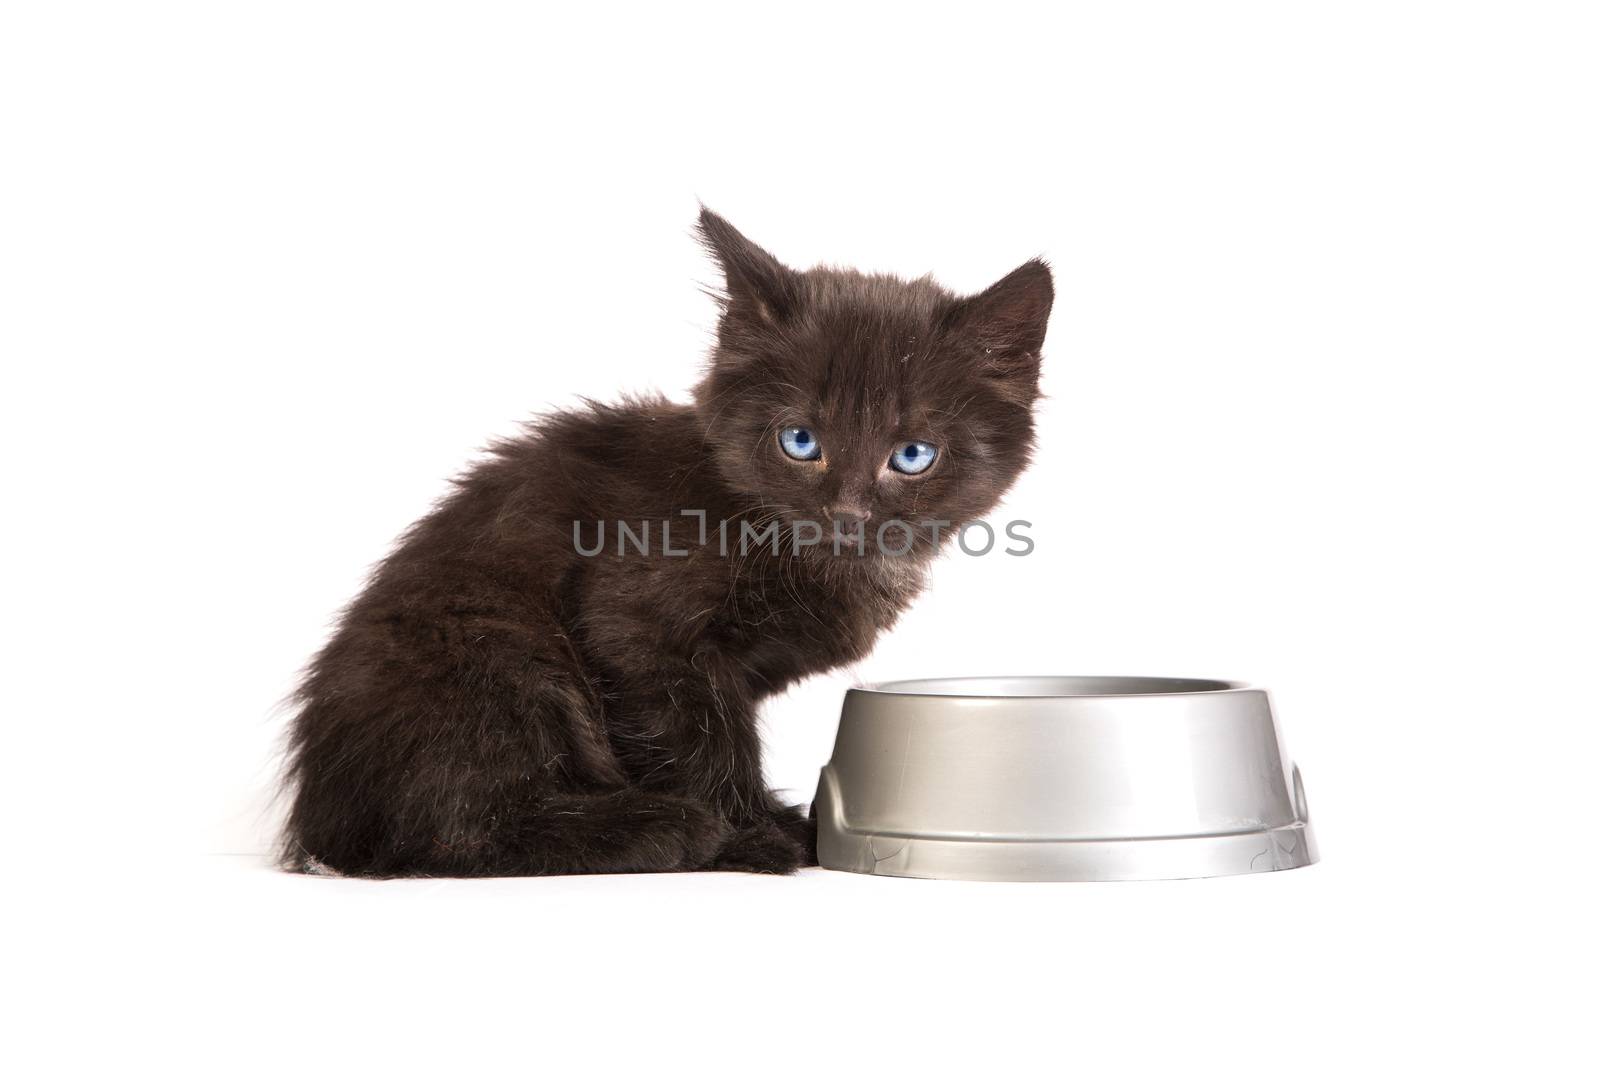 Black kitten eating cat food on a white background by bloodua